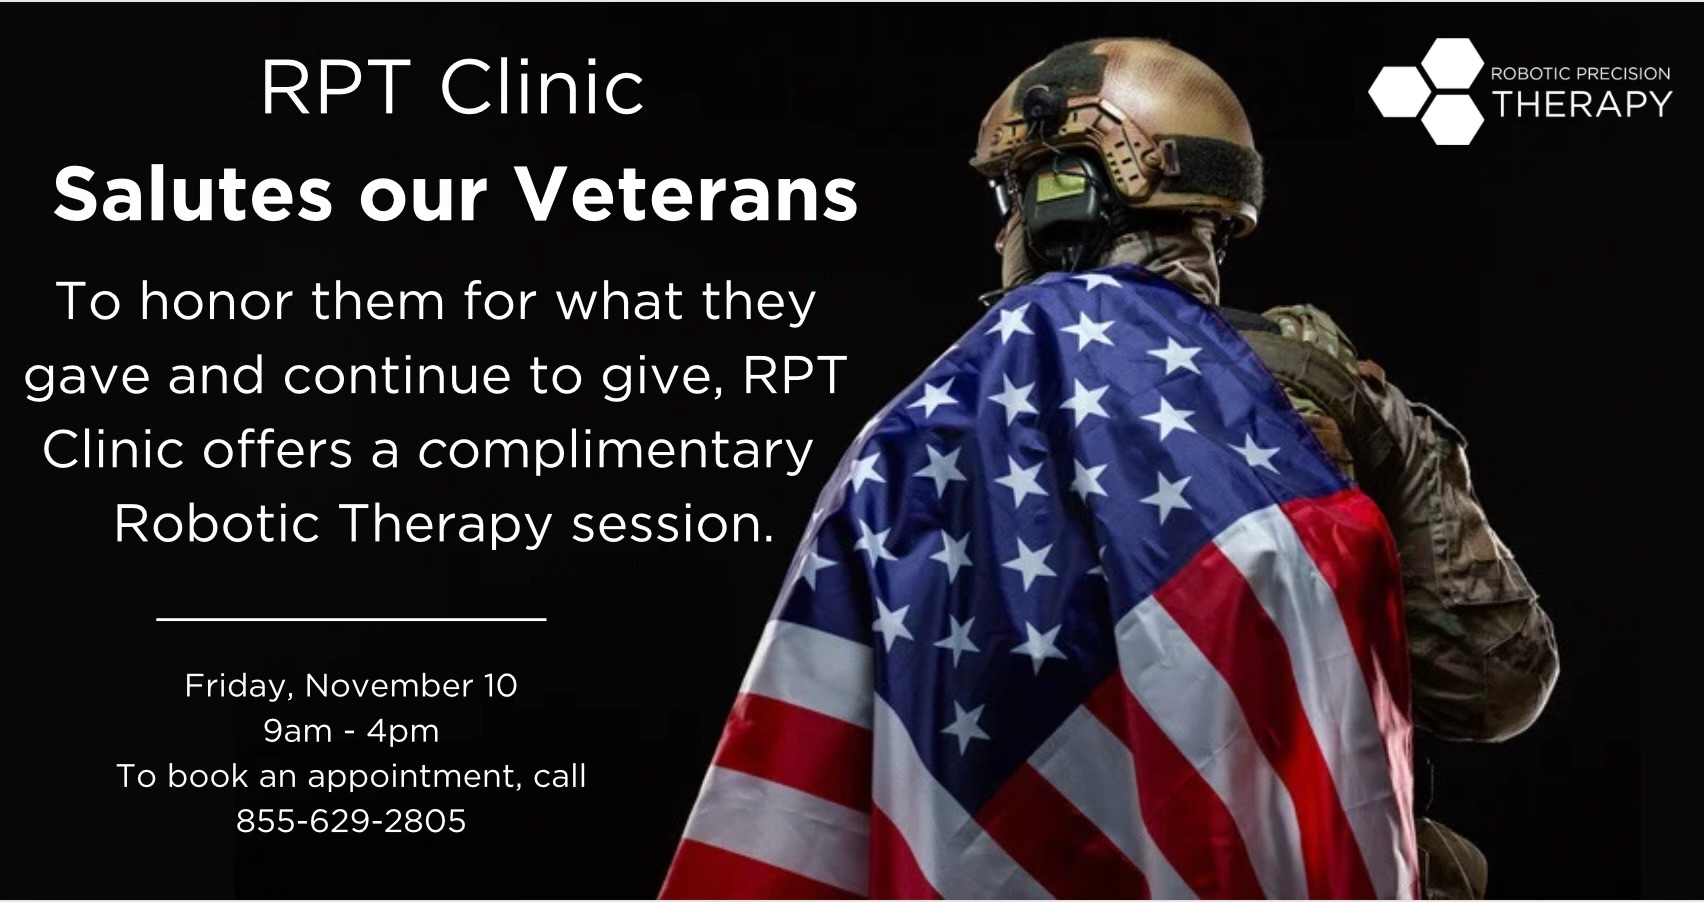 Robotic Precision Therapy Clinic gave Veterans a complimentary Robotic Therapy session